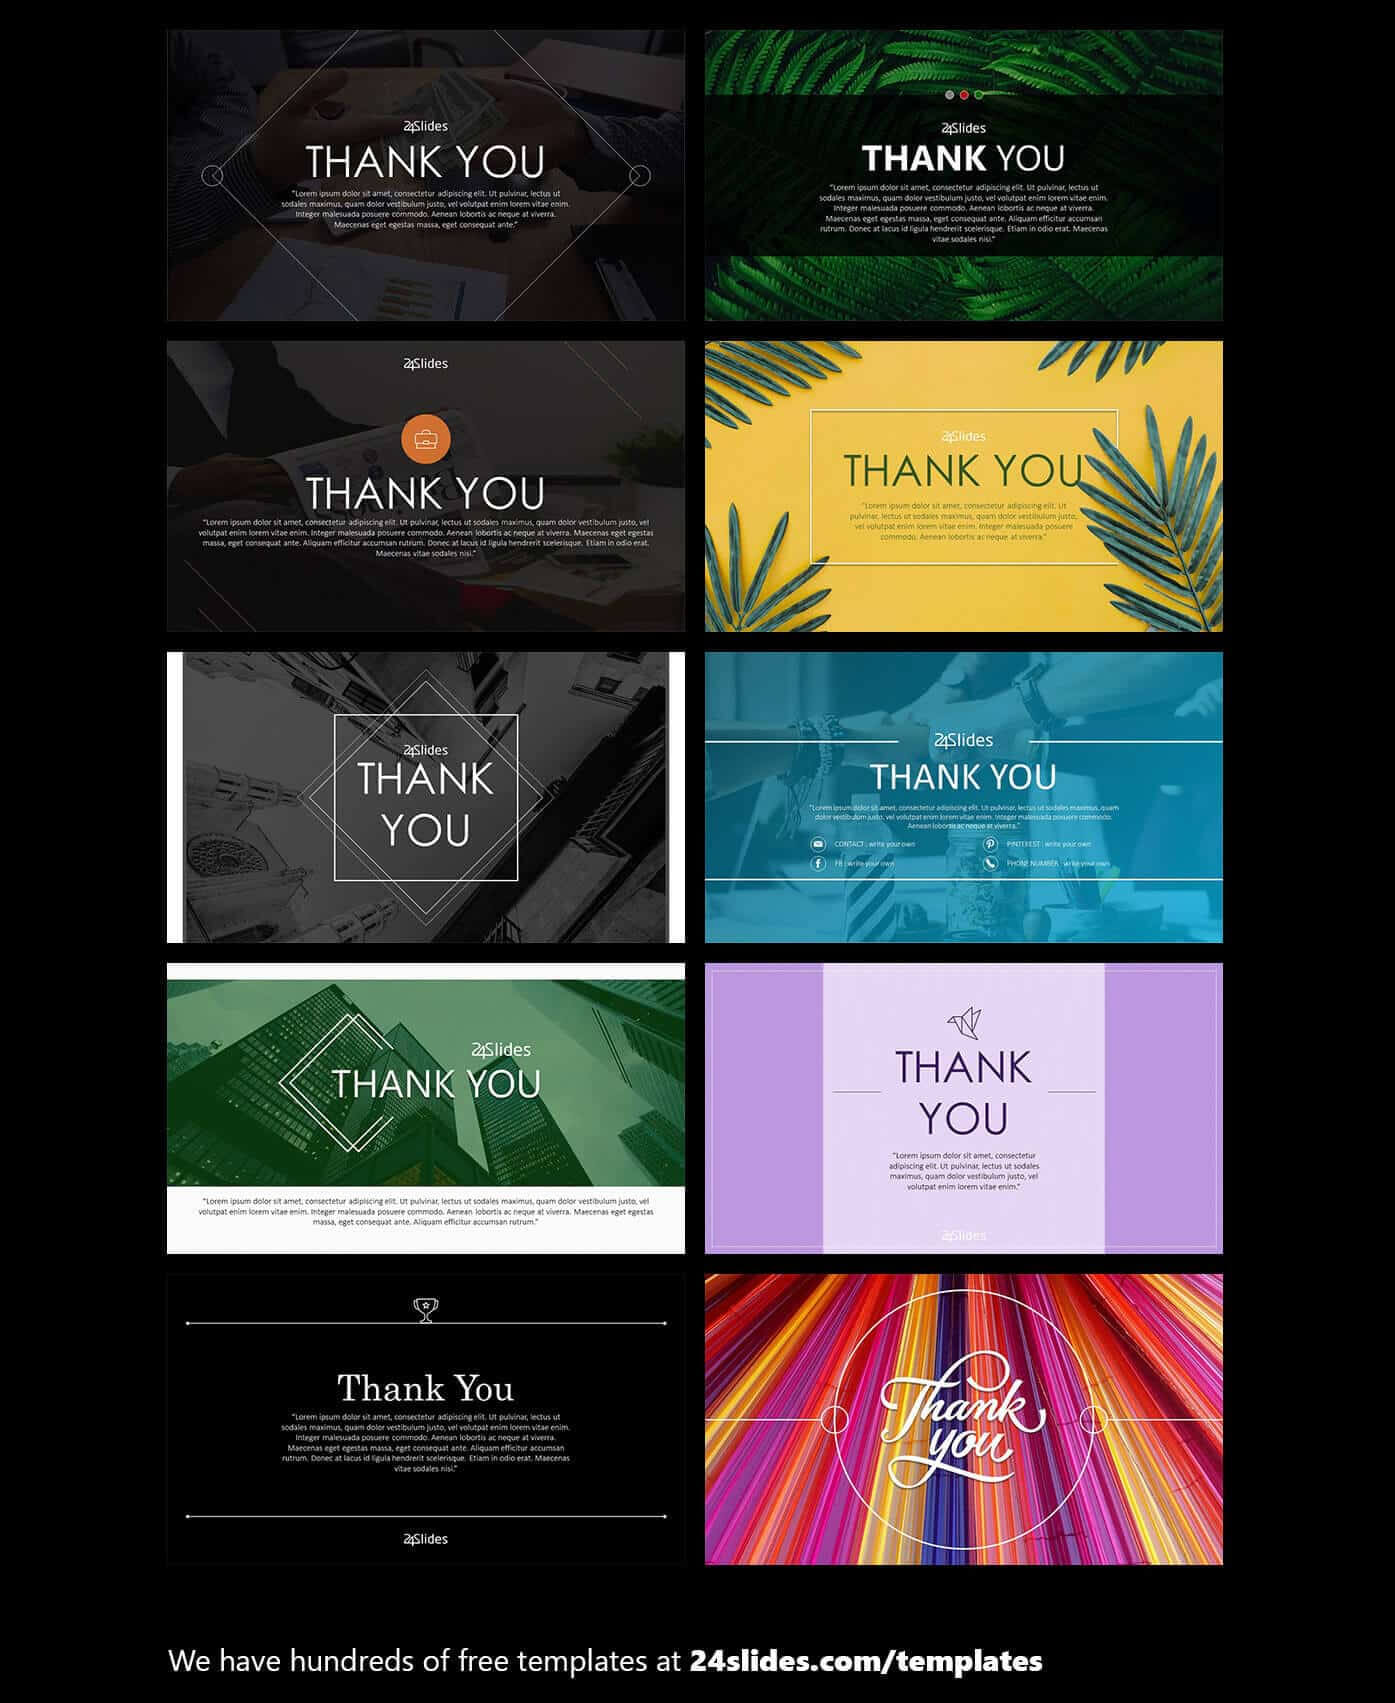 15 Fun And Colorful Free Powerpoint Templates | Present Better Pertaining To Fun Powerpoint Templates Free Download